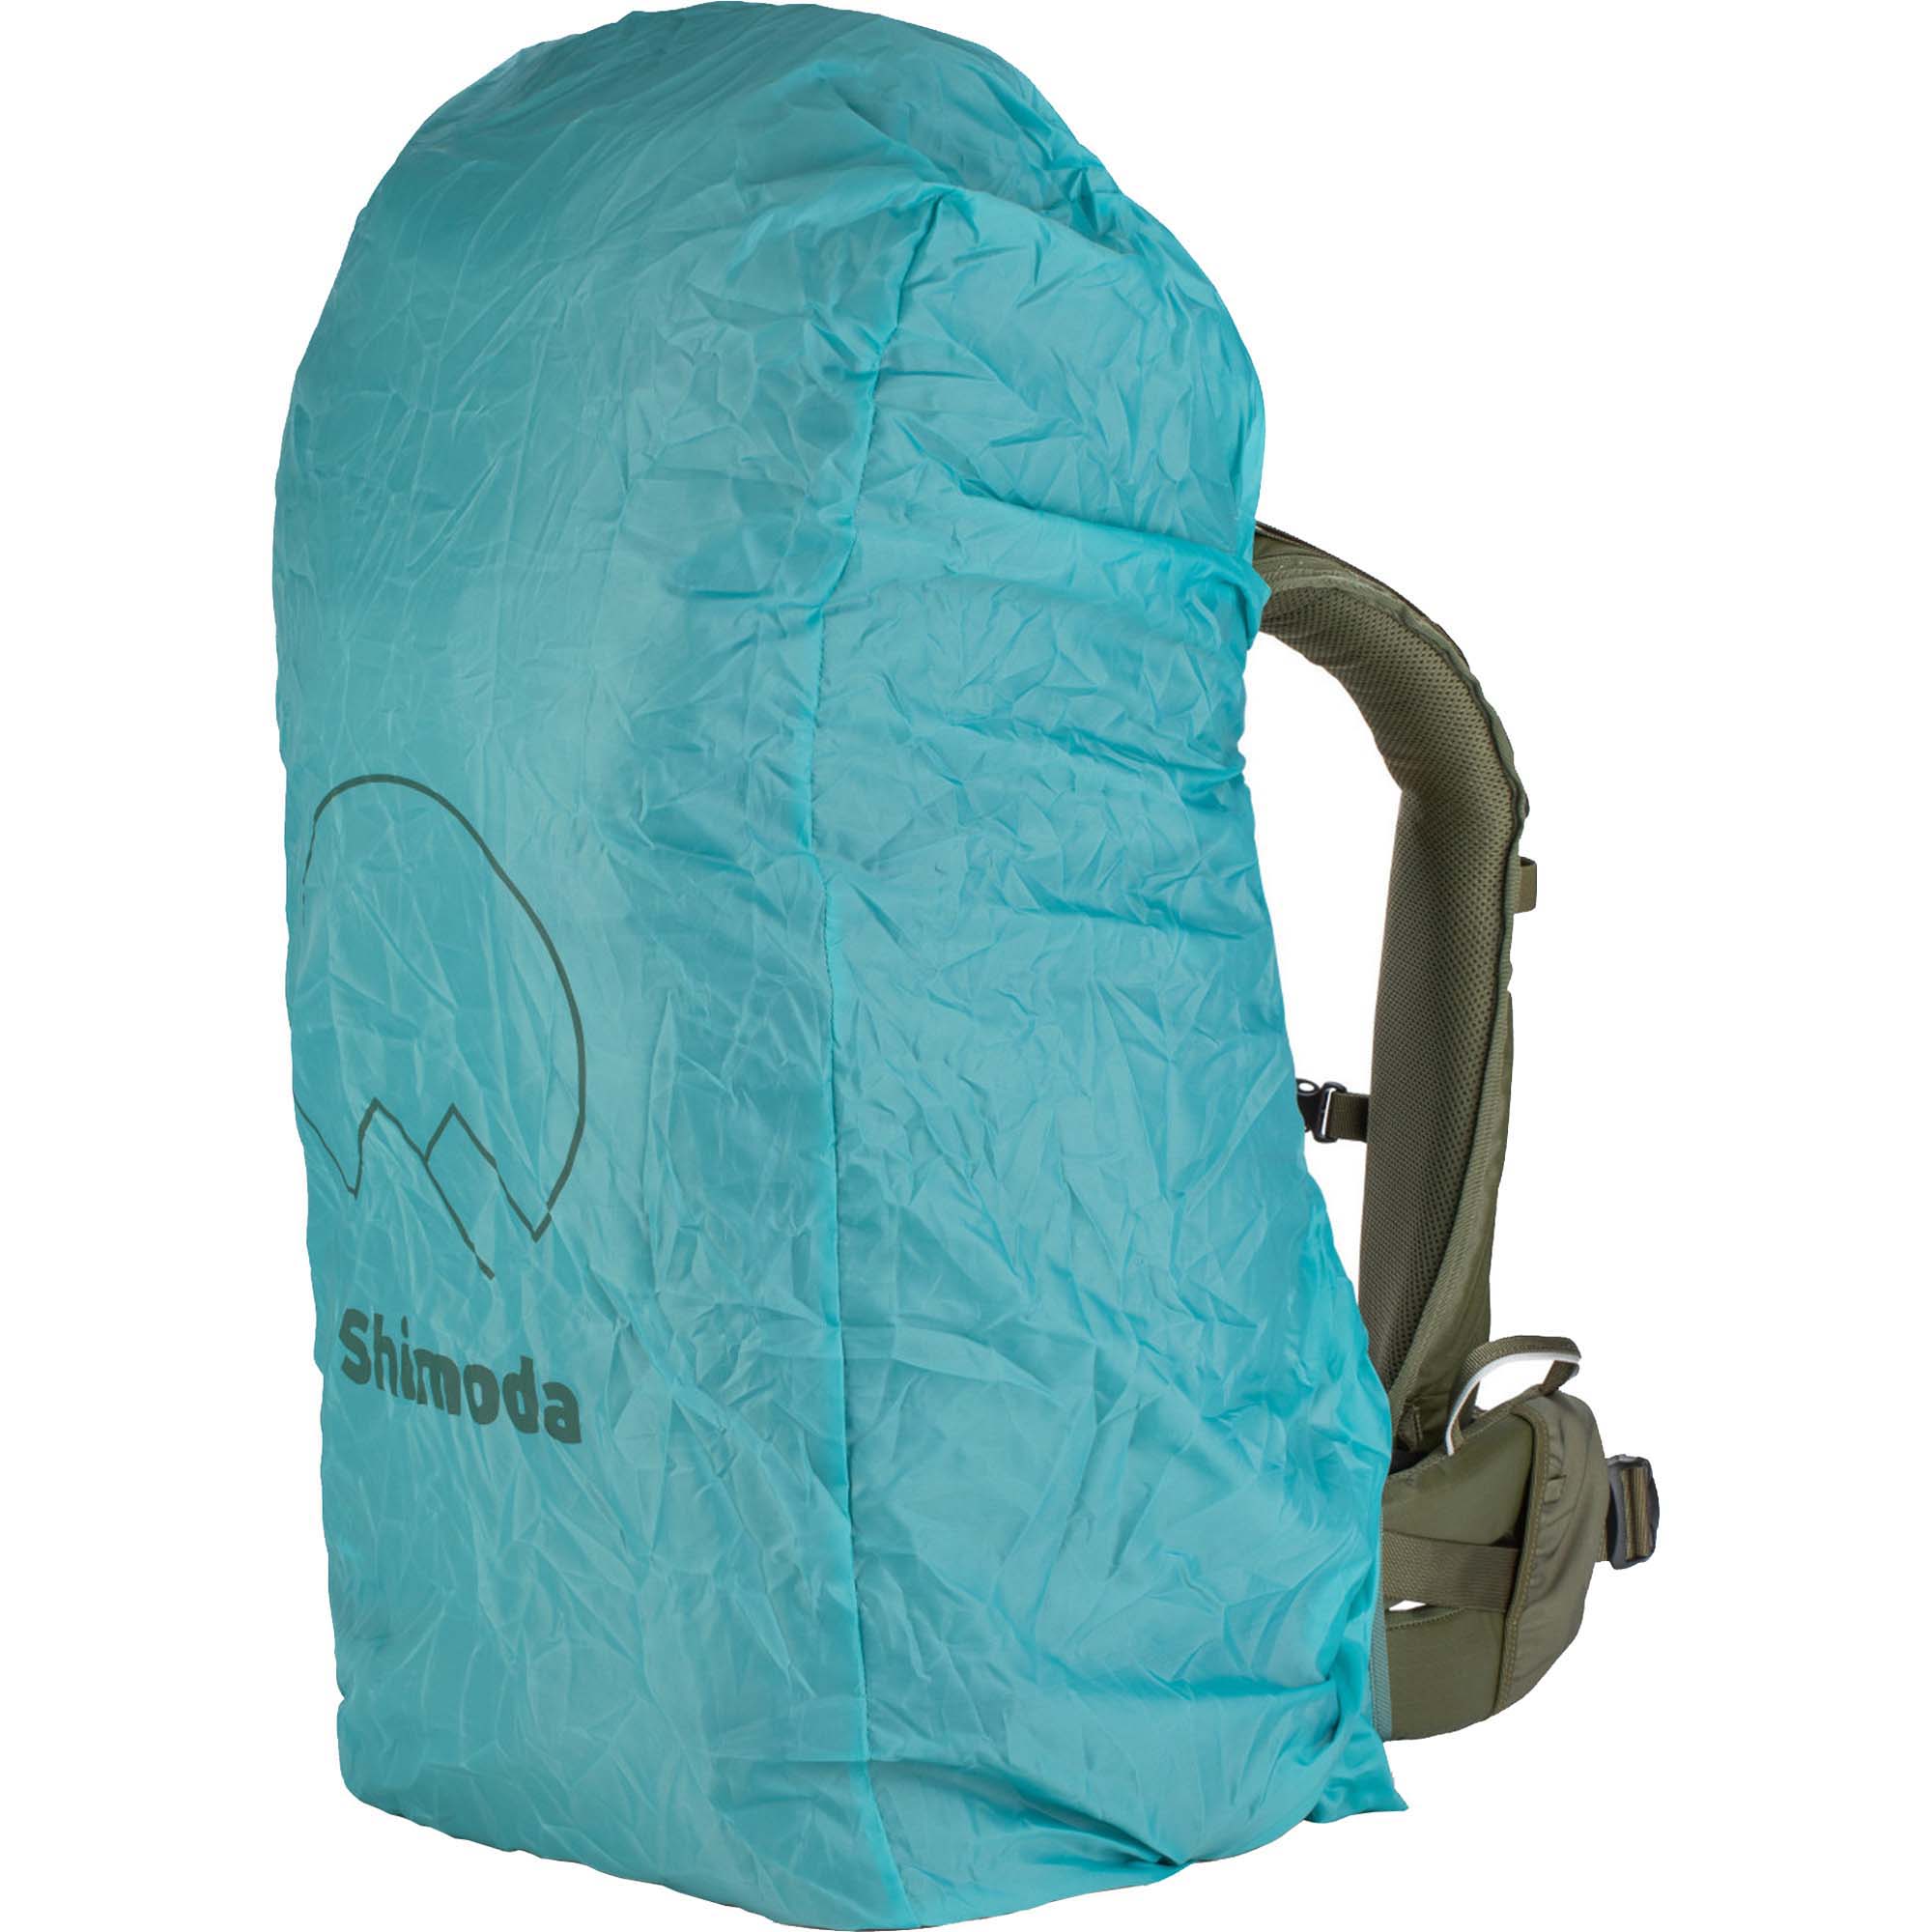 Shimoda Rain Cover for 70L Backpacks Weather Protector